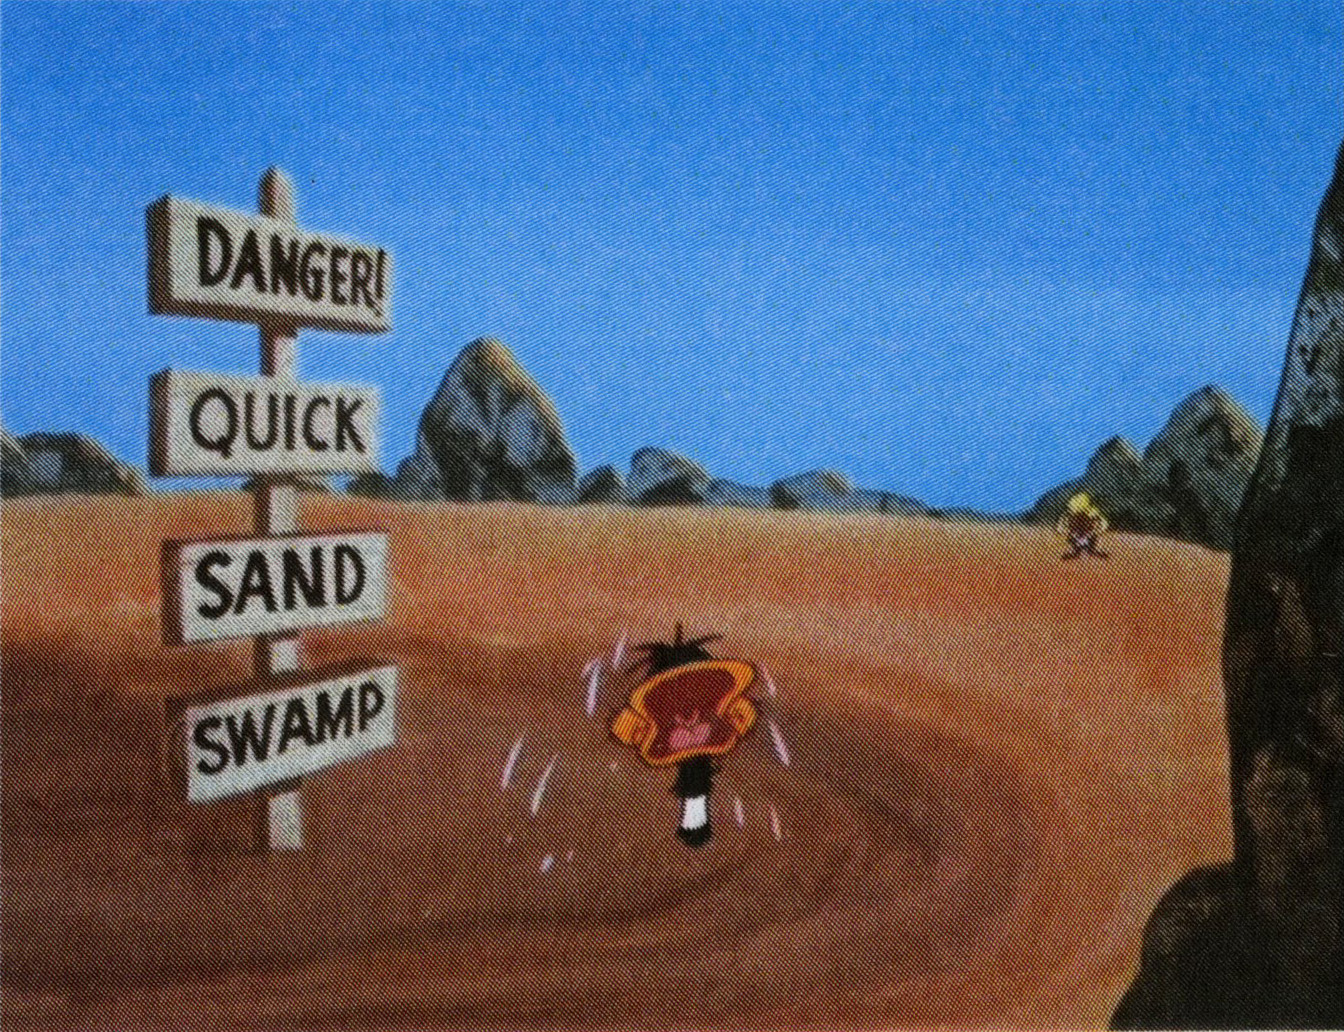 While looking at the map that says to left to the swamp, Daffy looks at the sign that say 